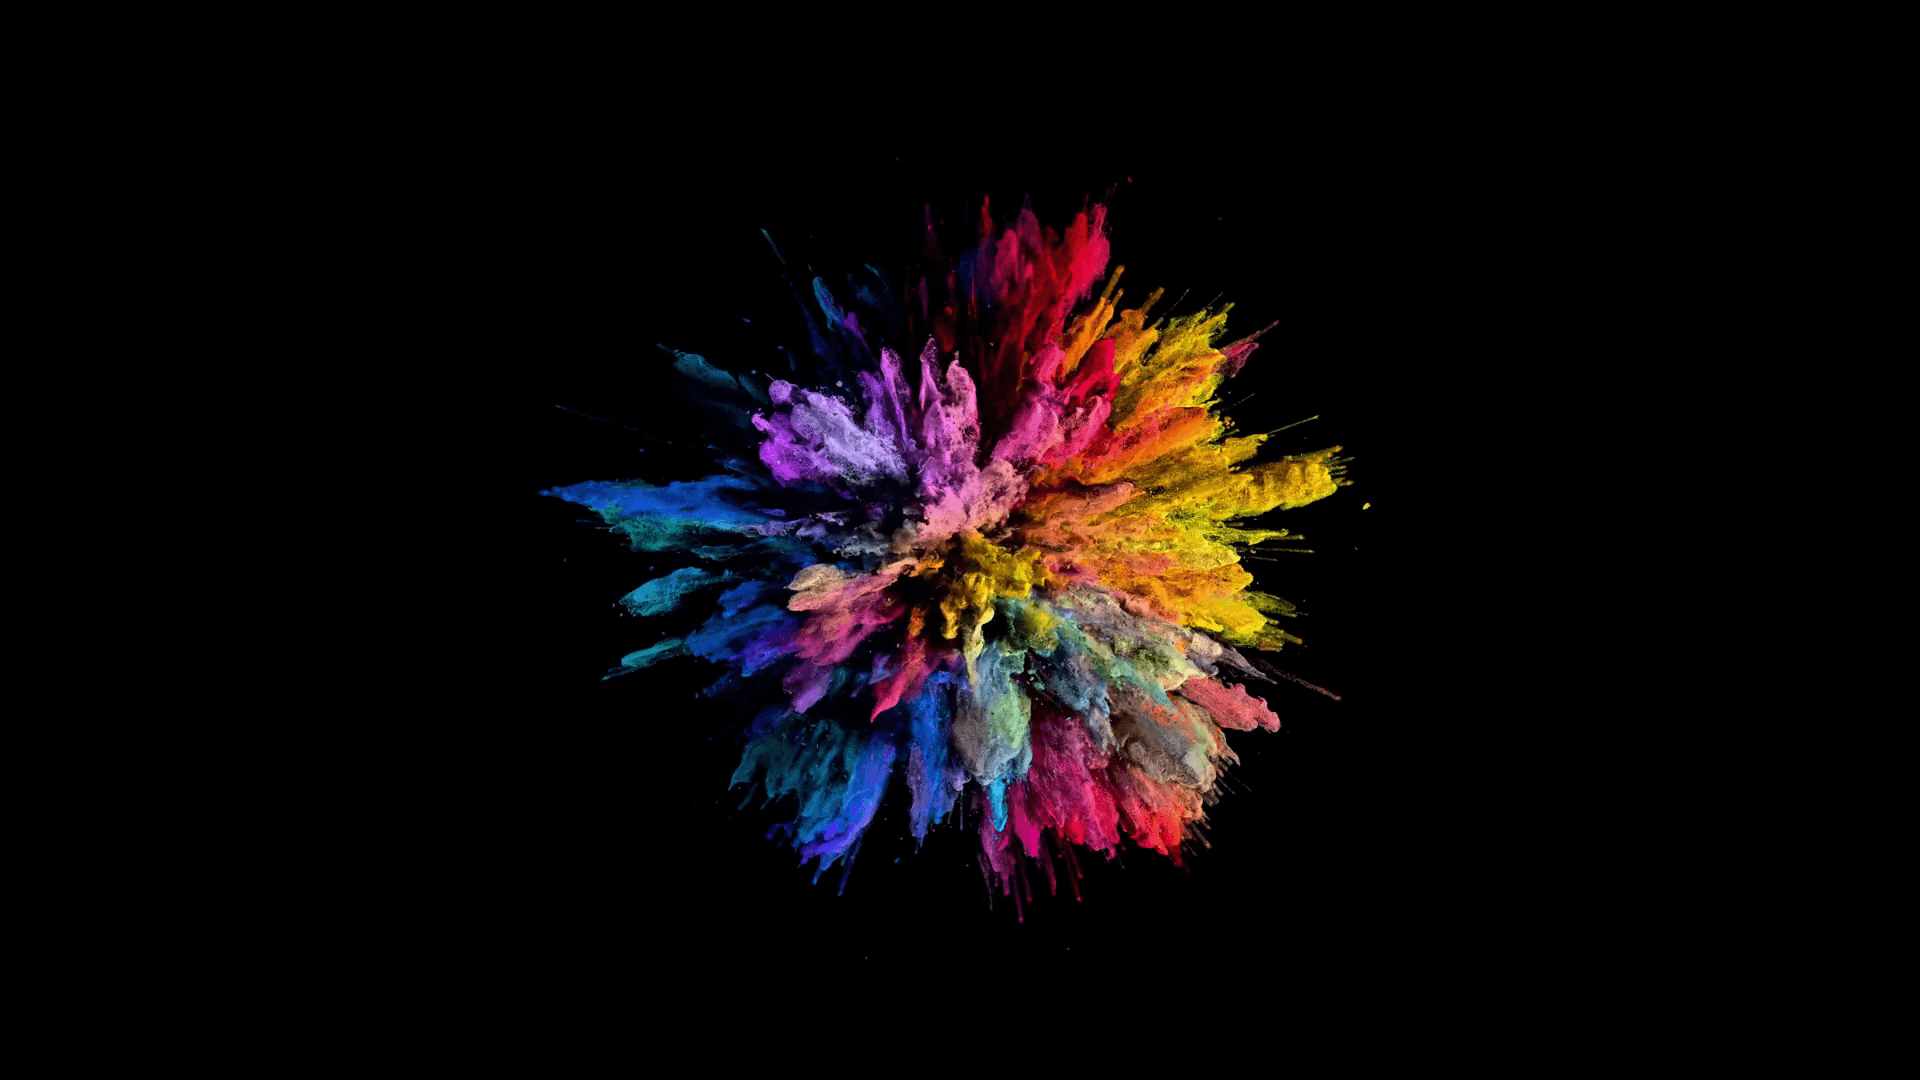 Cg animation of color powder explosion on black background. Slow